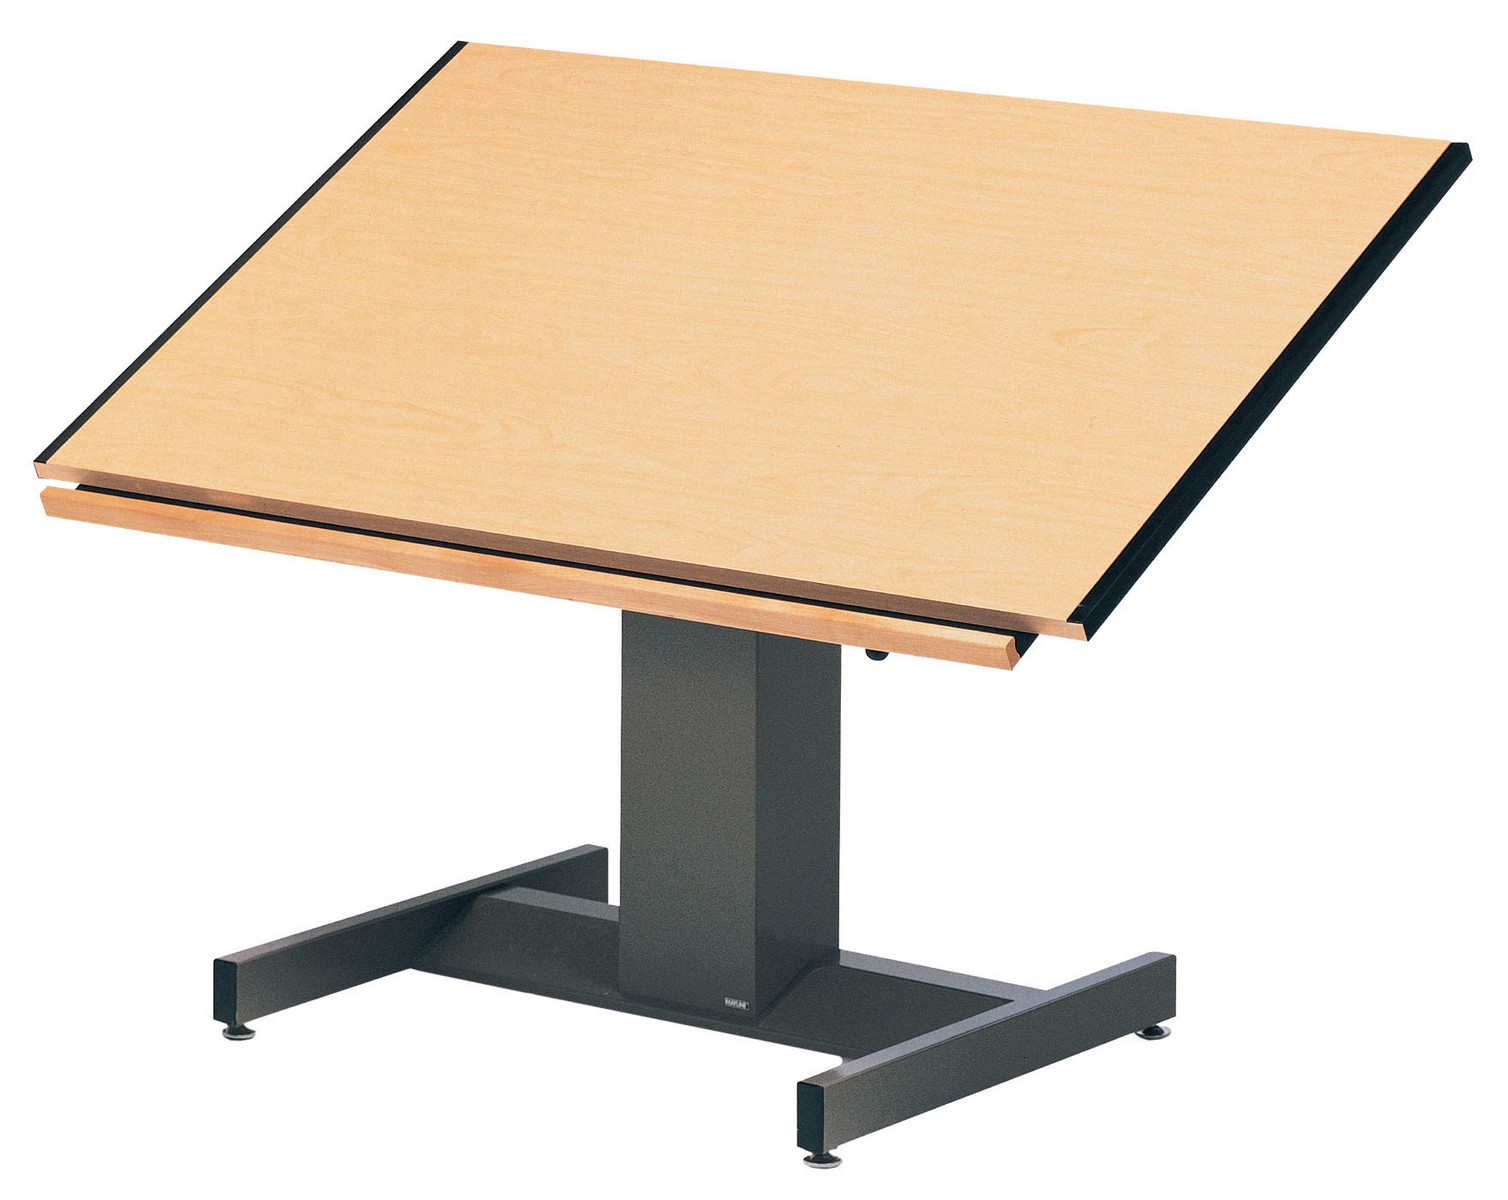 These tables are great because they include an electric motor